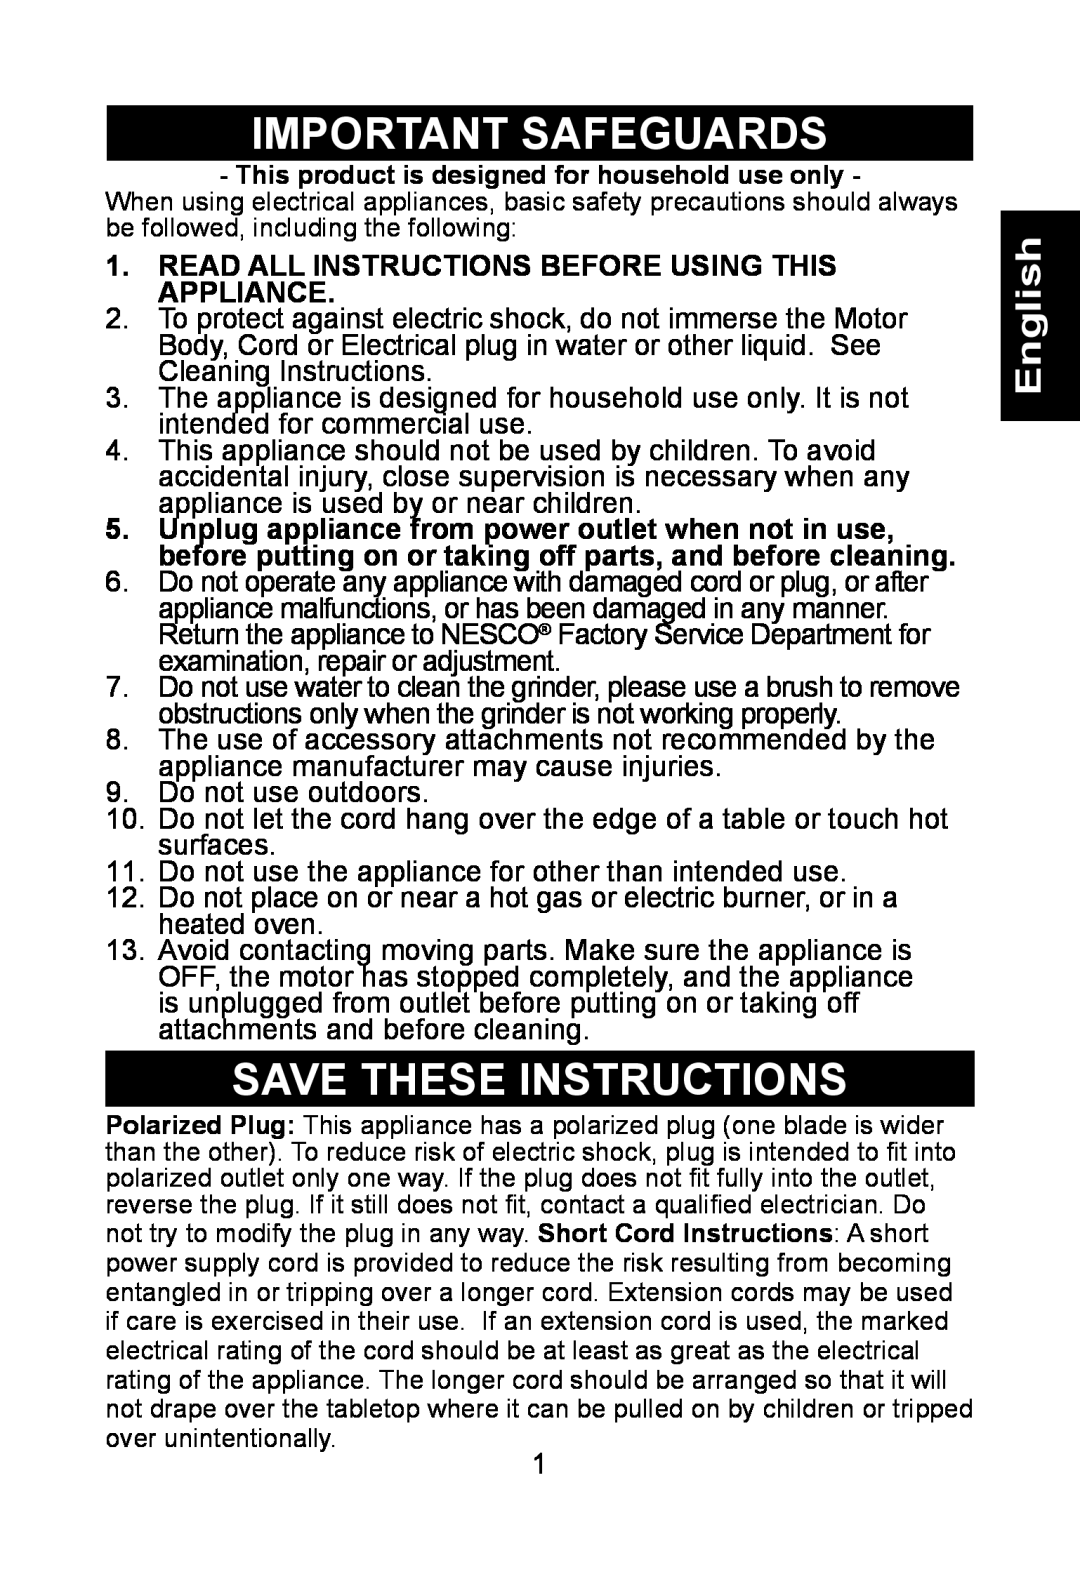 Nesco BG-88PR Important Safeguards, Save These Instructions, English, Read All Instructions Before Using This Appliance 